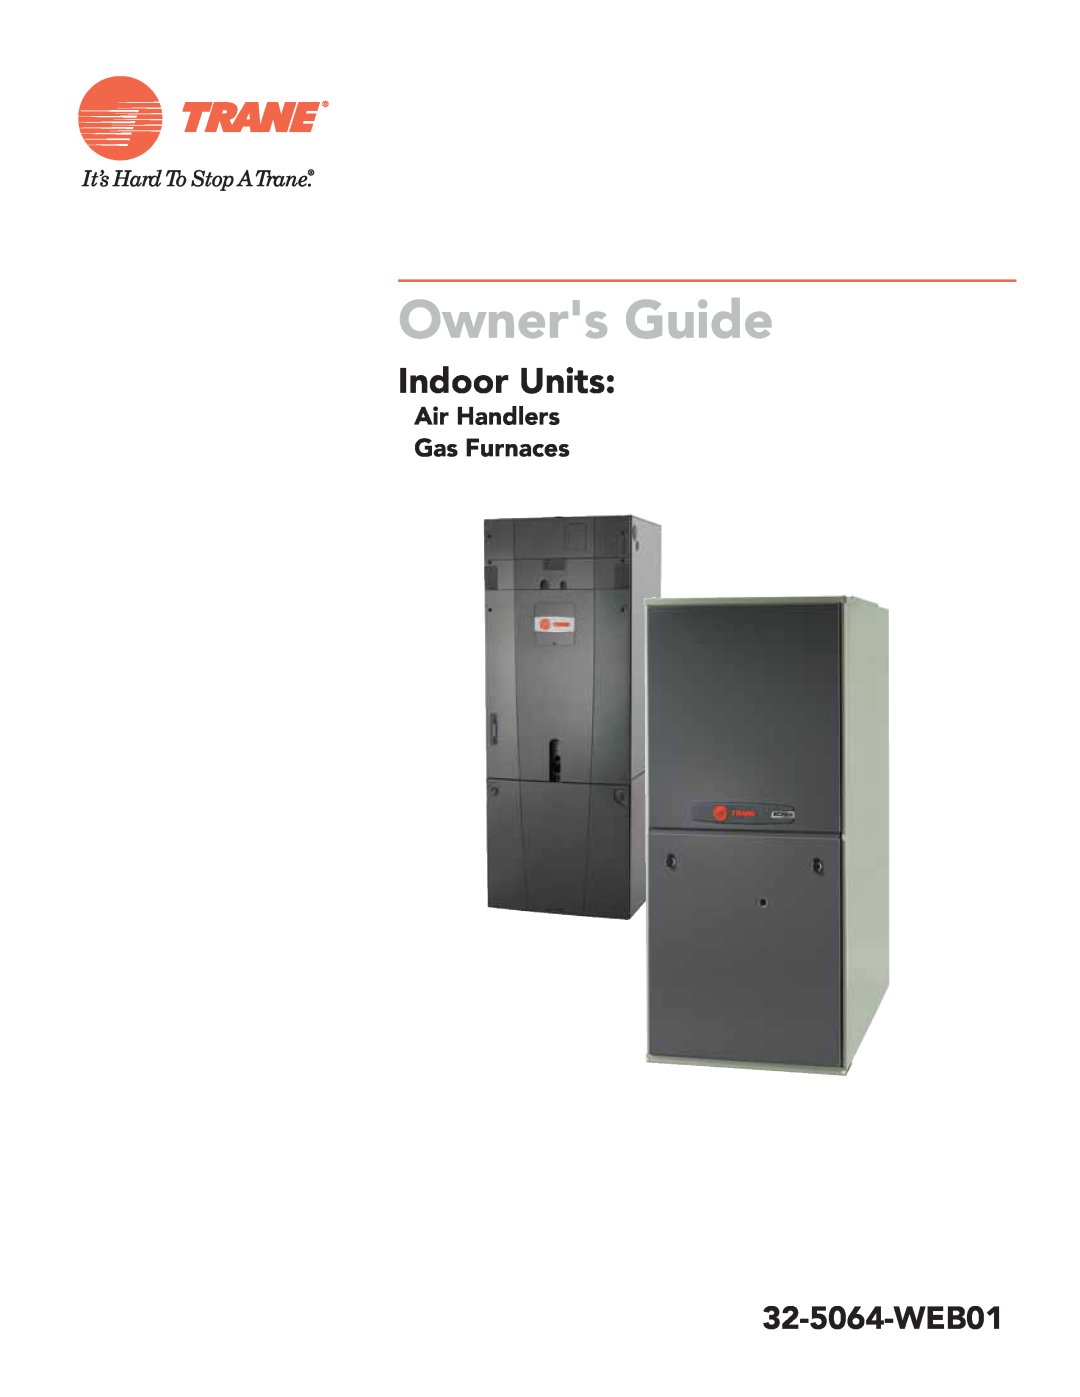 Trane Air Handlers Gas Furnaces manual Owners Guide, Indoor Units, 32-5064-WEB01 